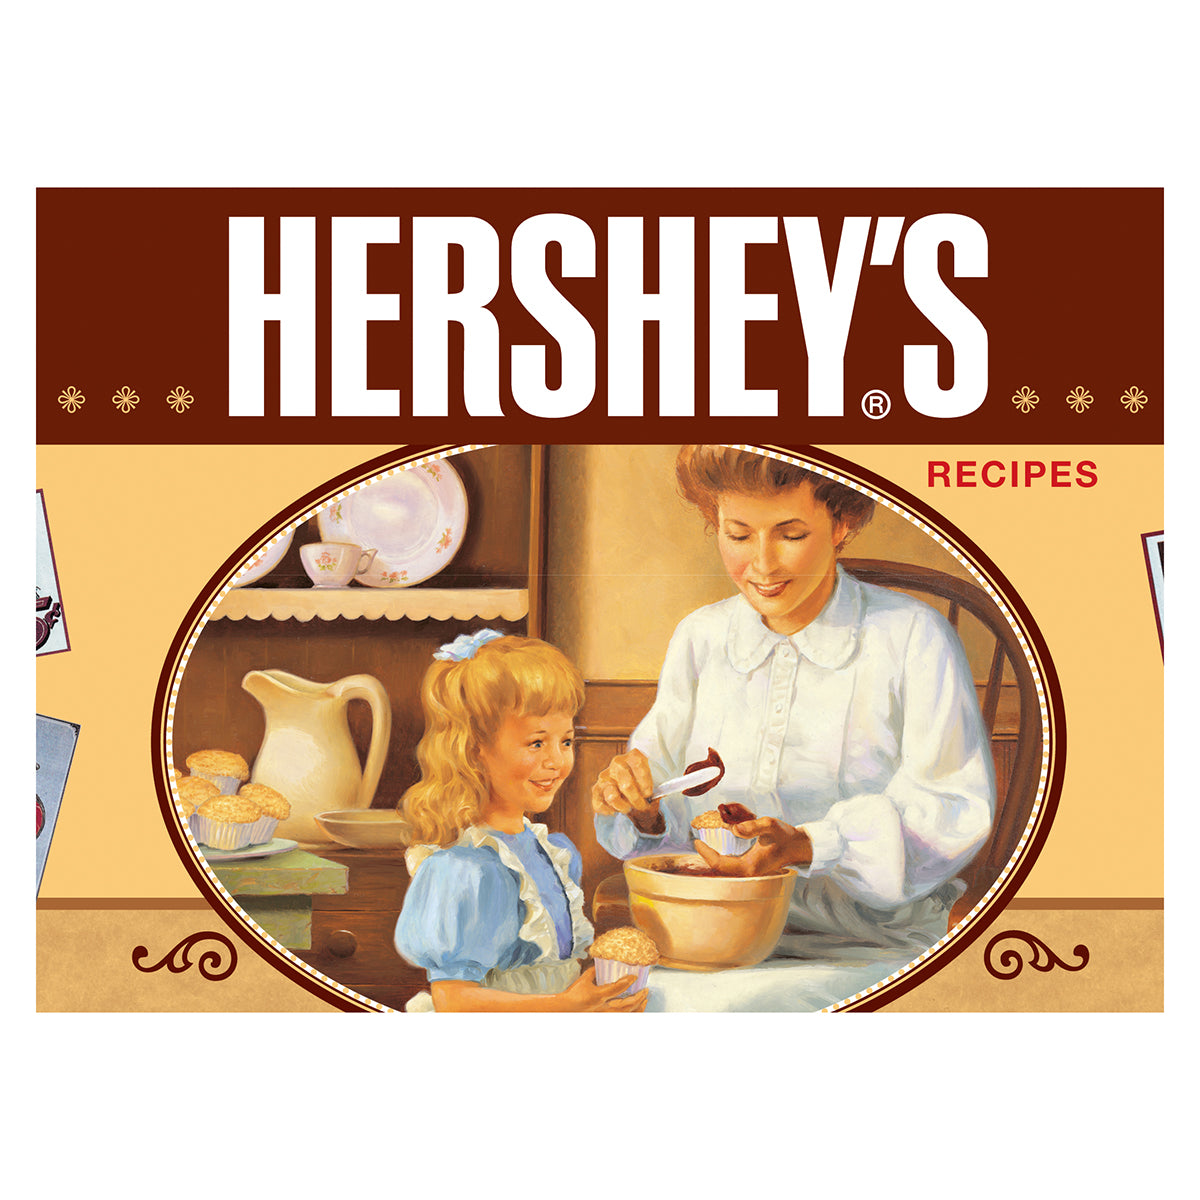 Hershey's Recipes  Recipe Card Collection Tin